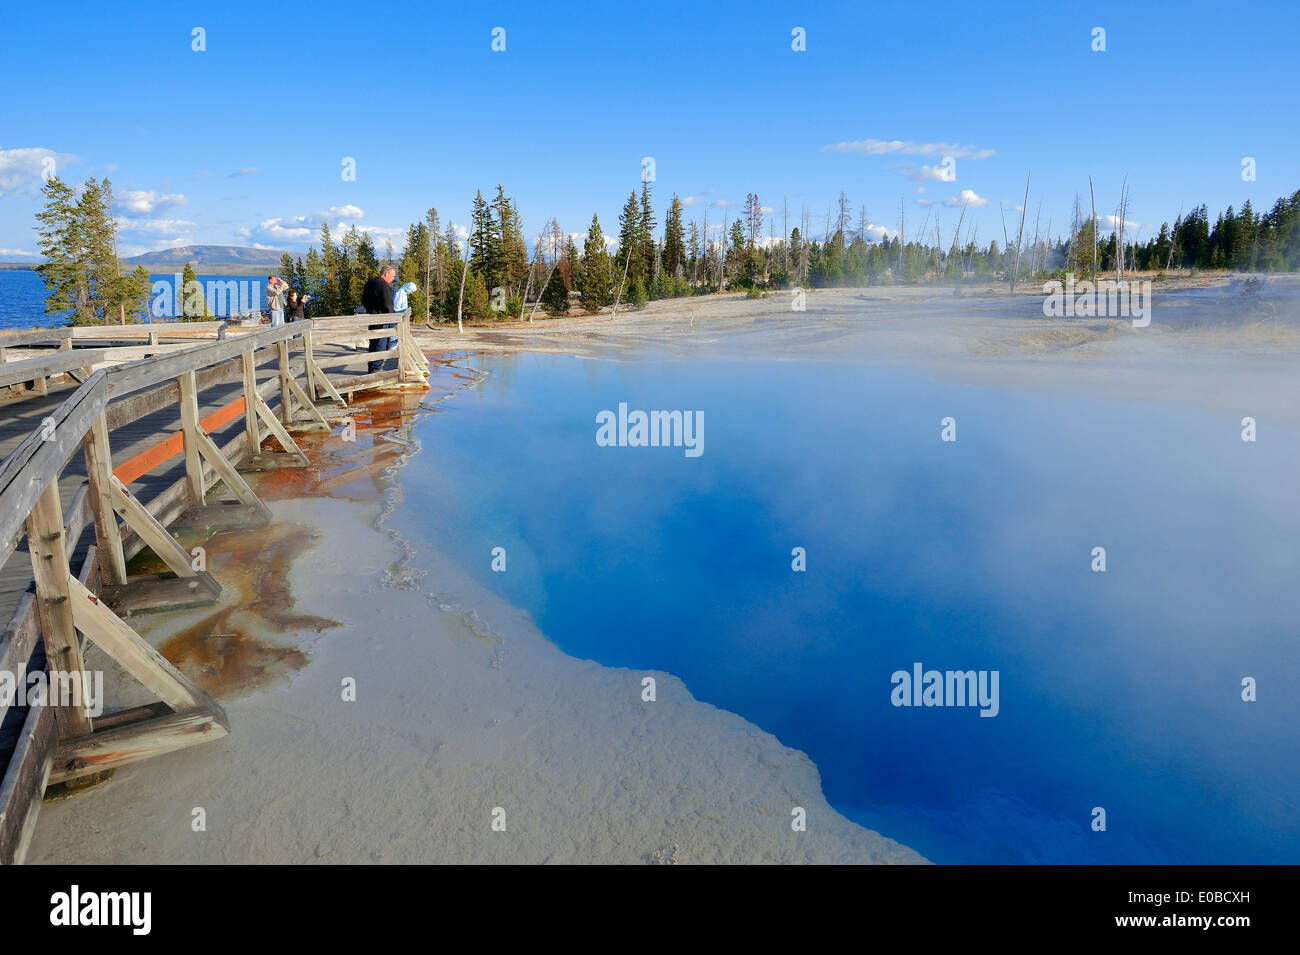 Black Pool, West Thumb Geyser Basin, parc national de Yellowstone, Wyoming, USA Banque D'Images